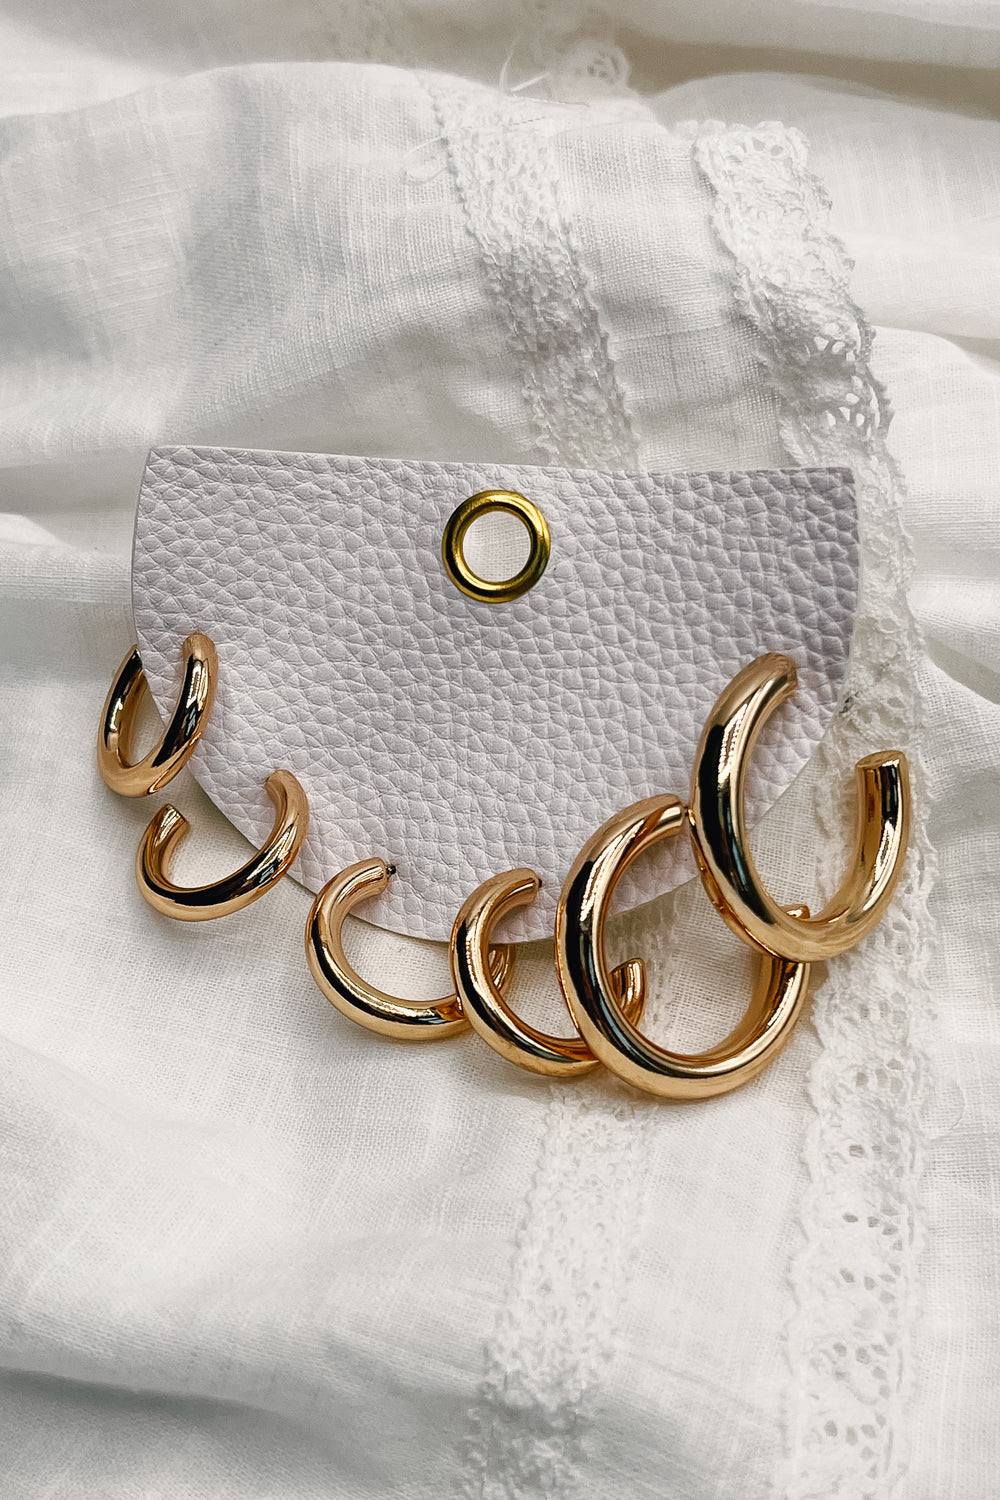 An alternate view of the Rochelle gold earring set. Featured are three sets of gold hoops varying in size.